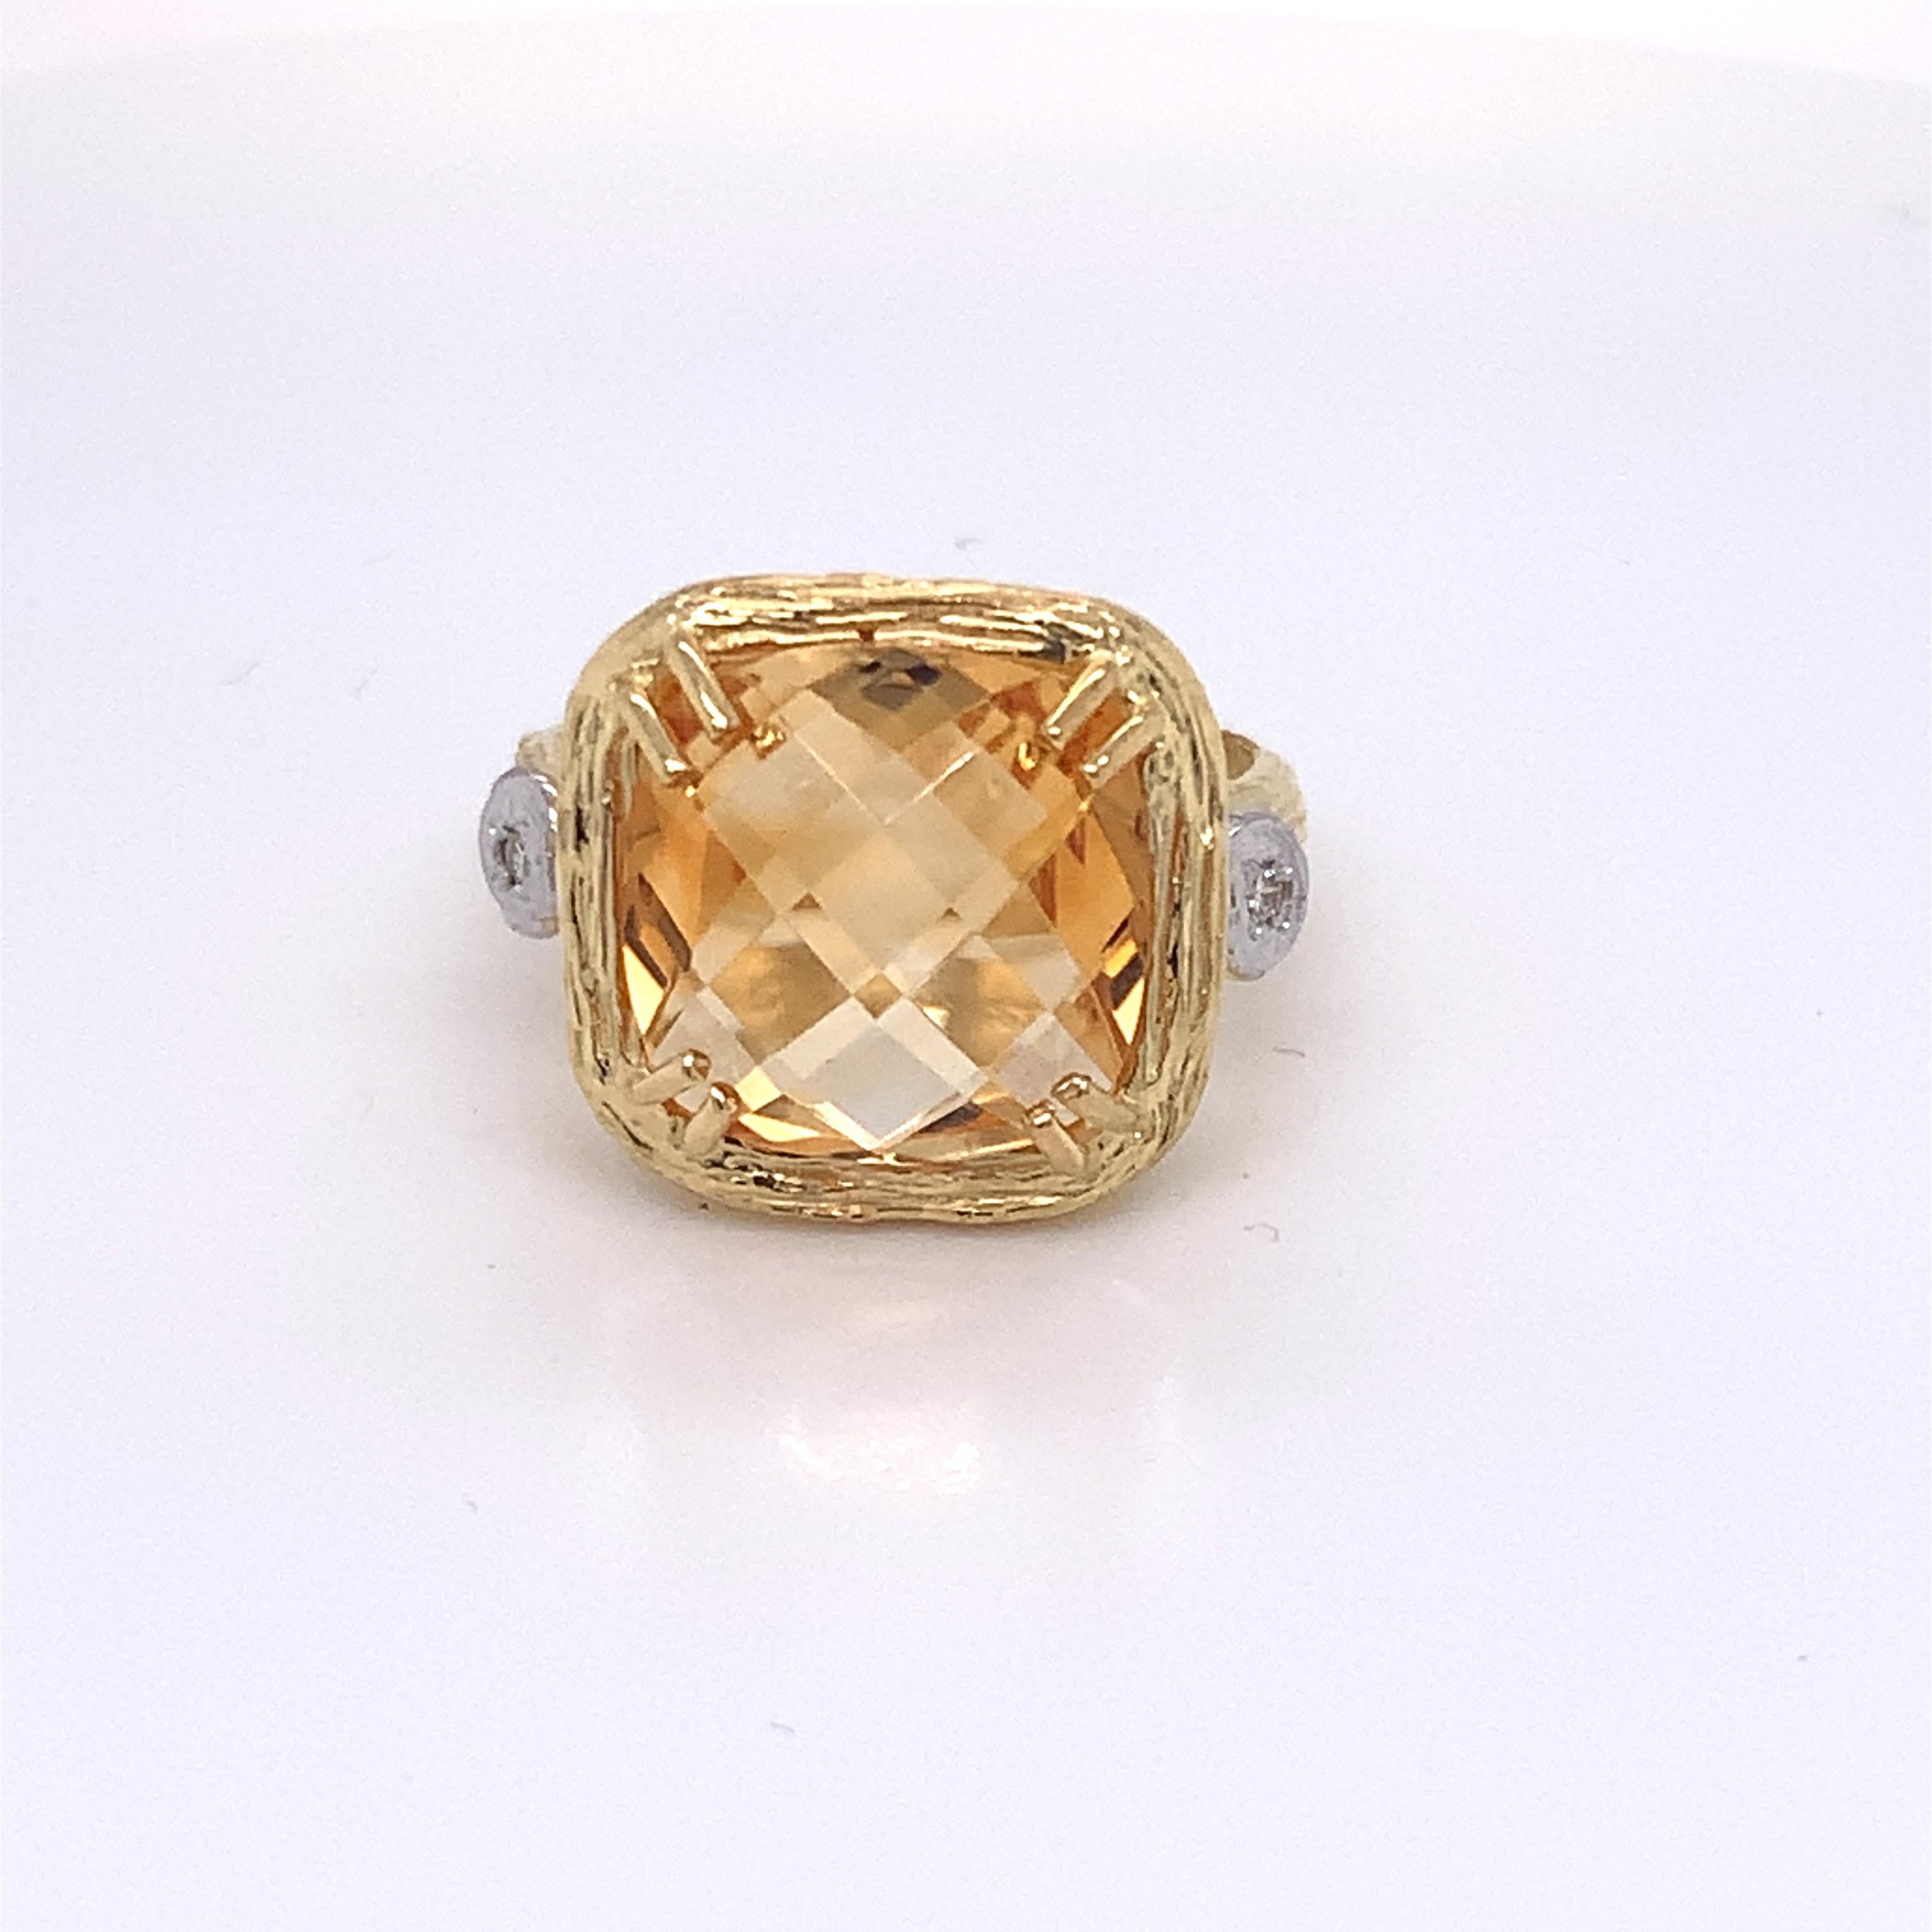 For Sale:  Hand-Crafted 14 Karat Yellow Gold Citrine Color Stone Ring 3